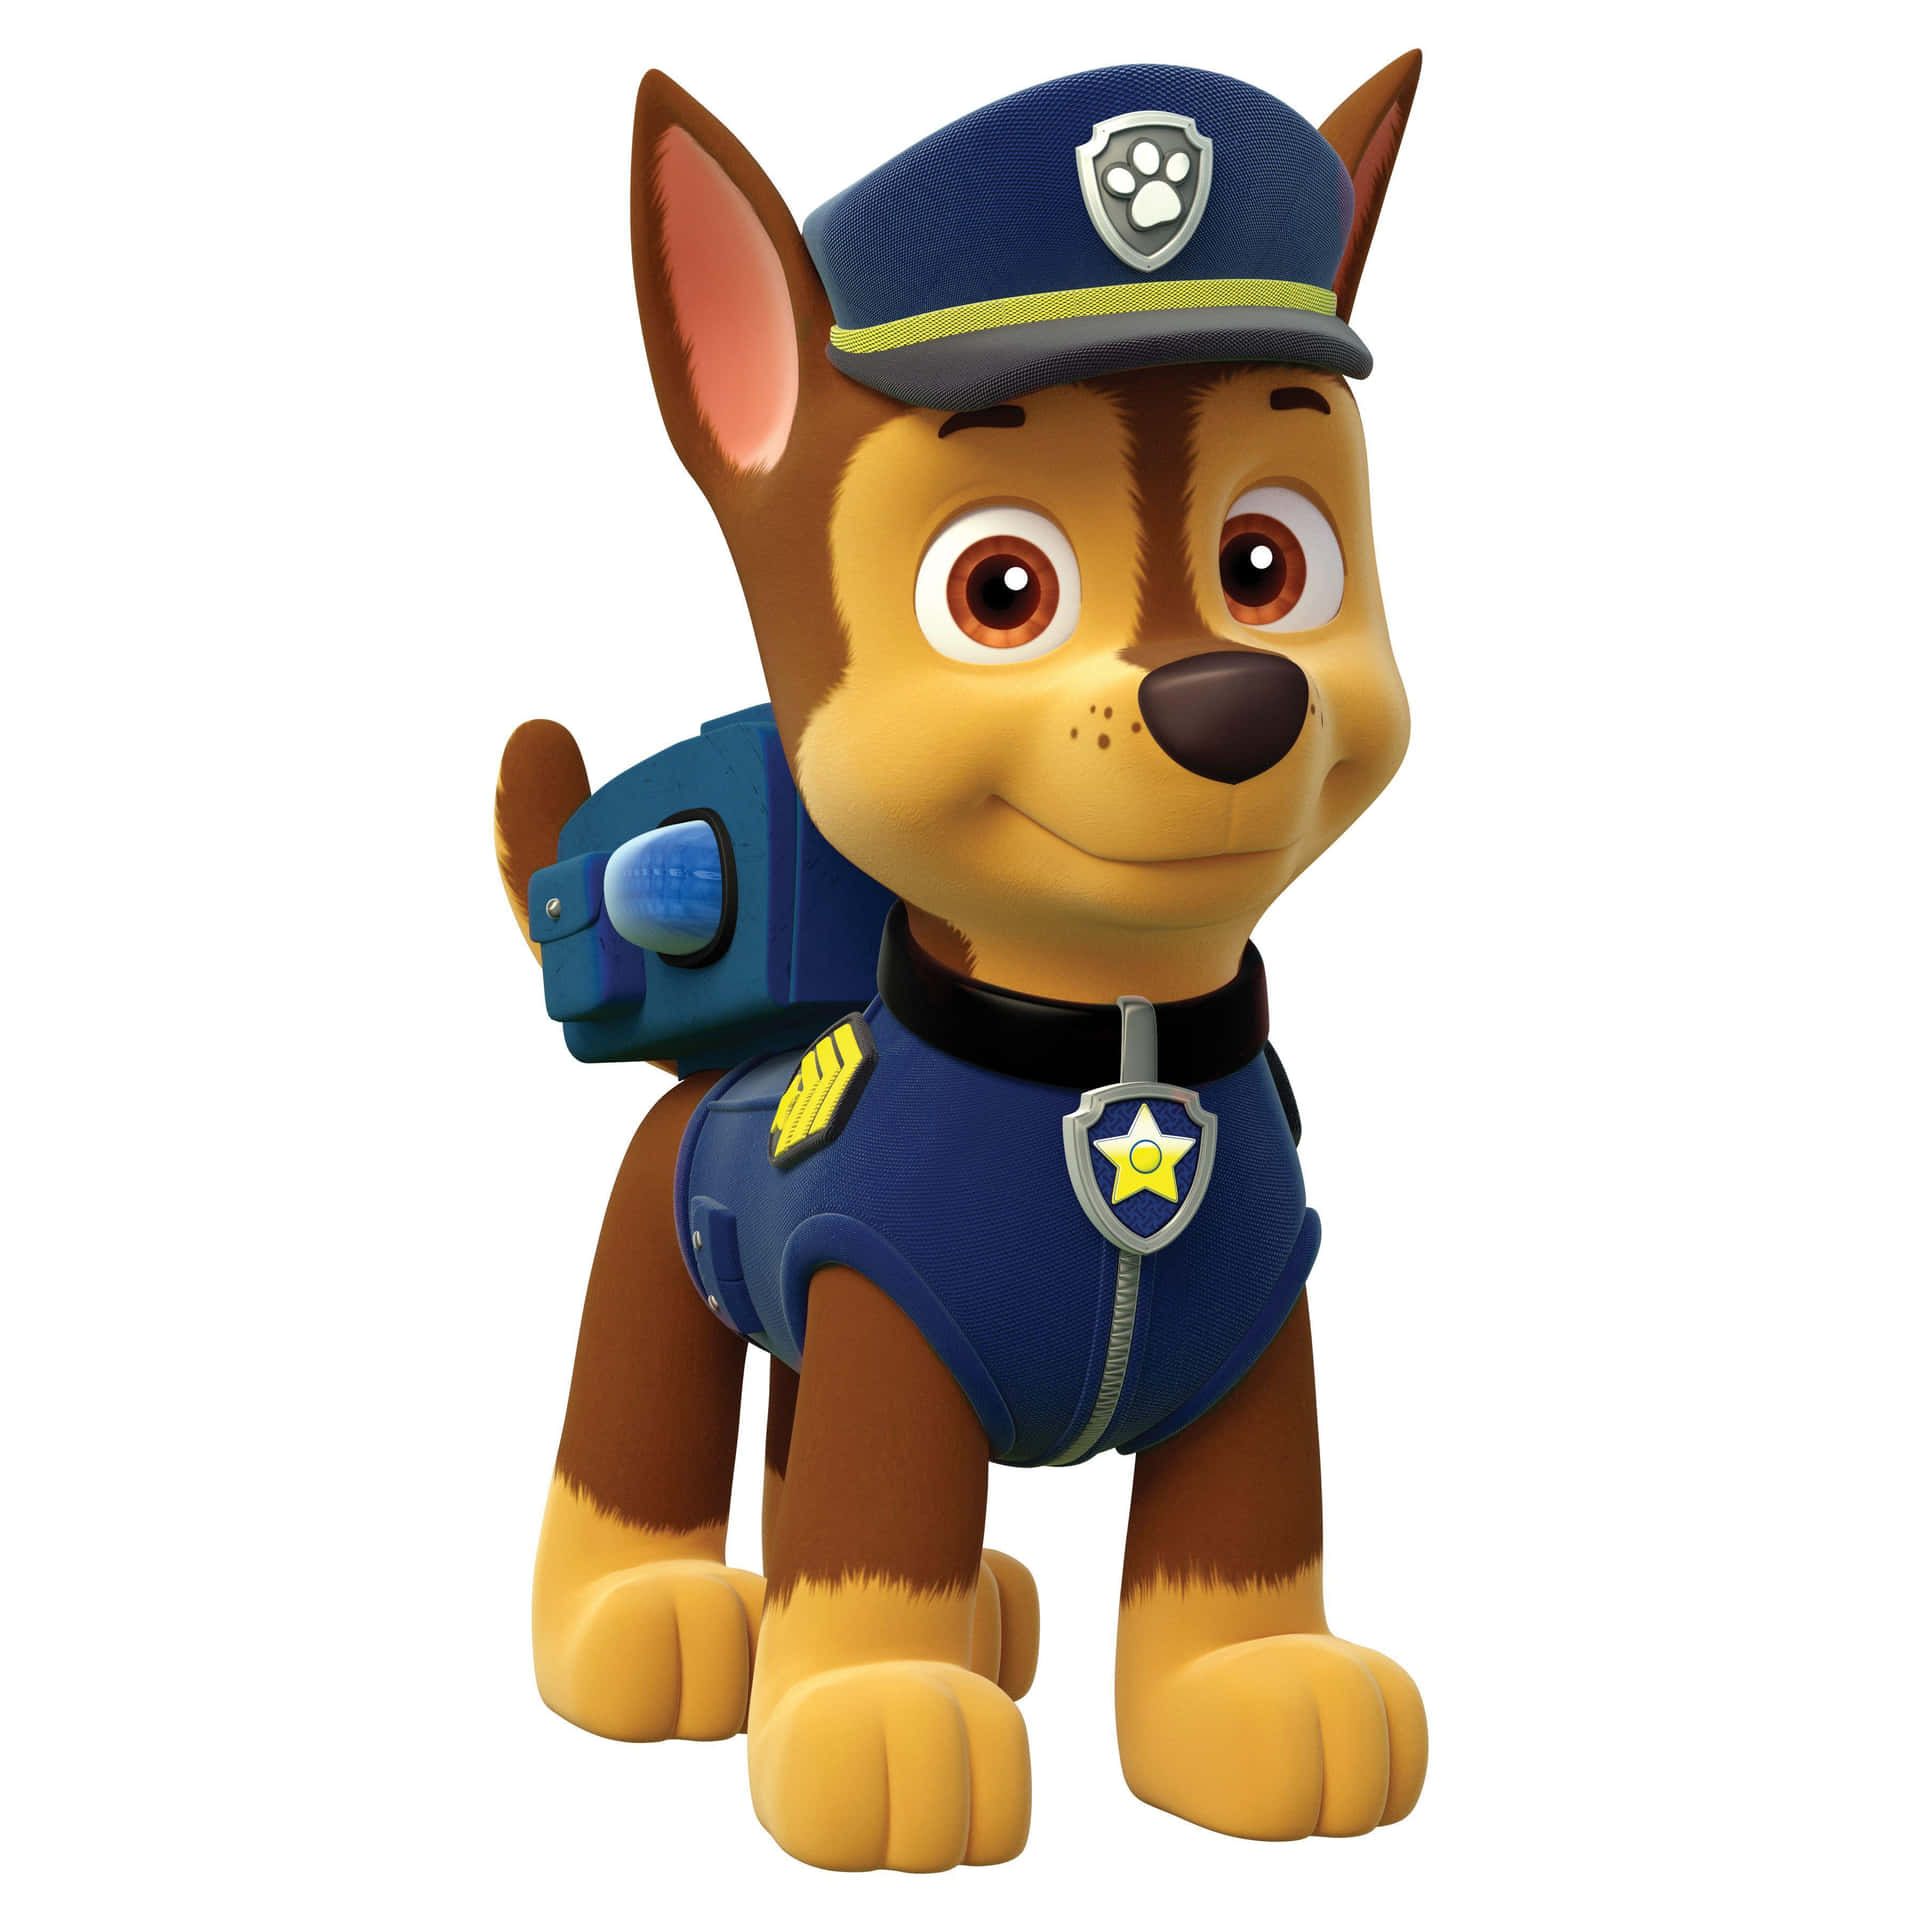 Skye, the courageous and loyal pup of the Paw Patrol Wallpaper